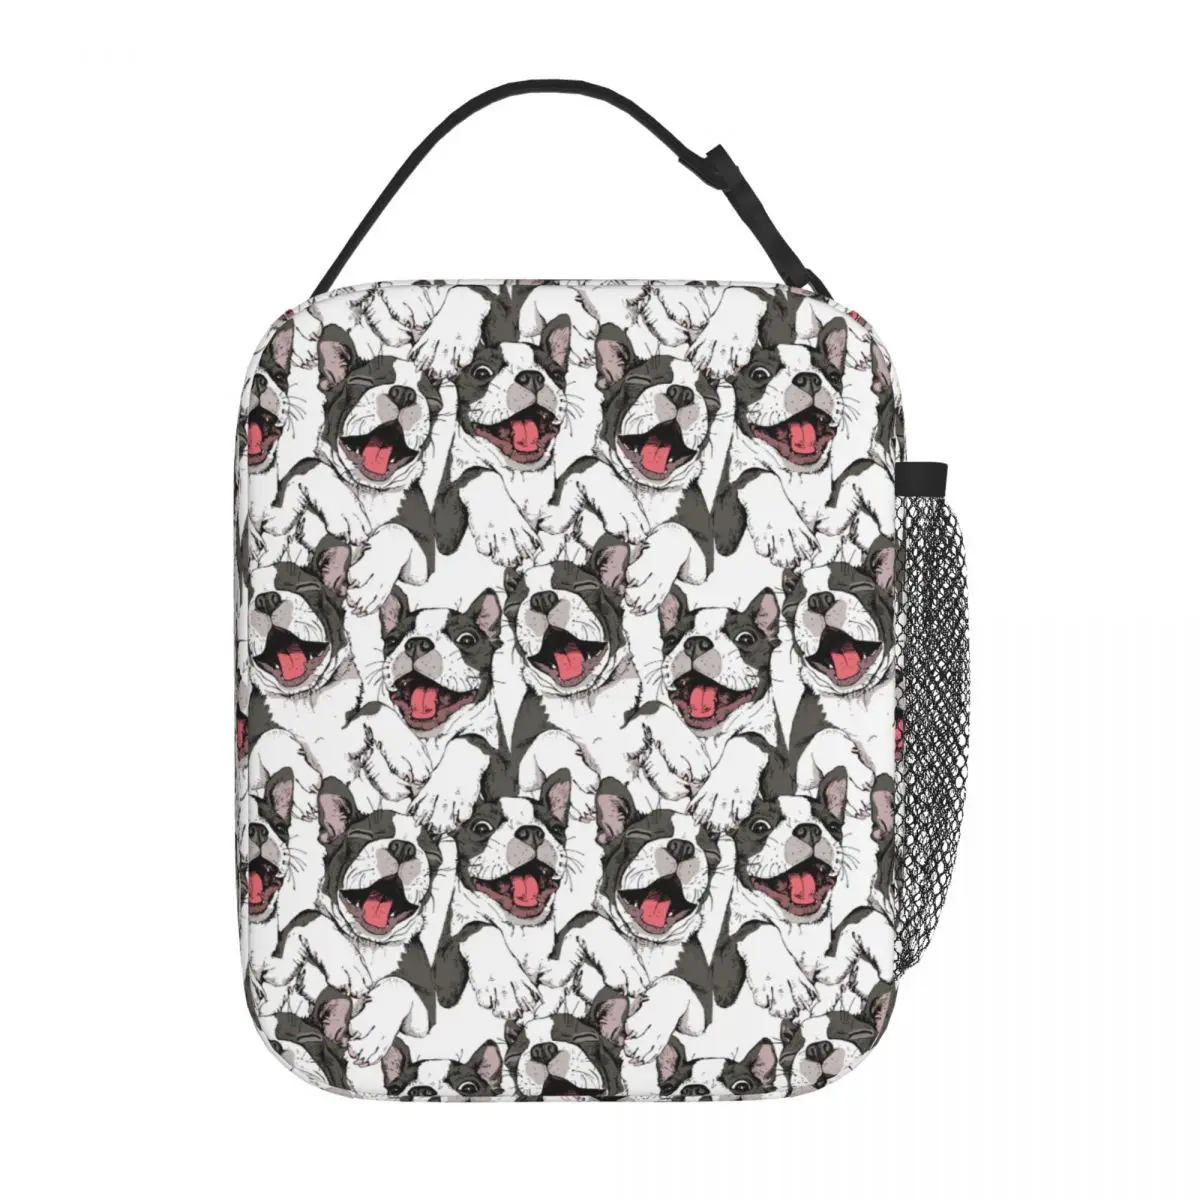 

Smiling Funny Boston Terrier Merch Insulated Lunch Bags For Work Dog Adorable Puppy Food Box Reusable Thermal Cooler Lunch Boxes